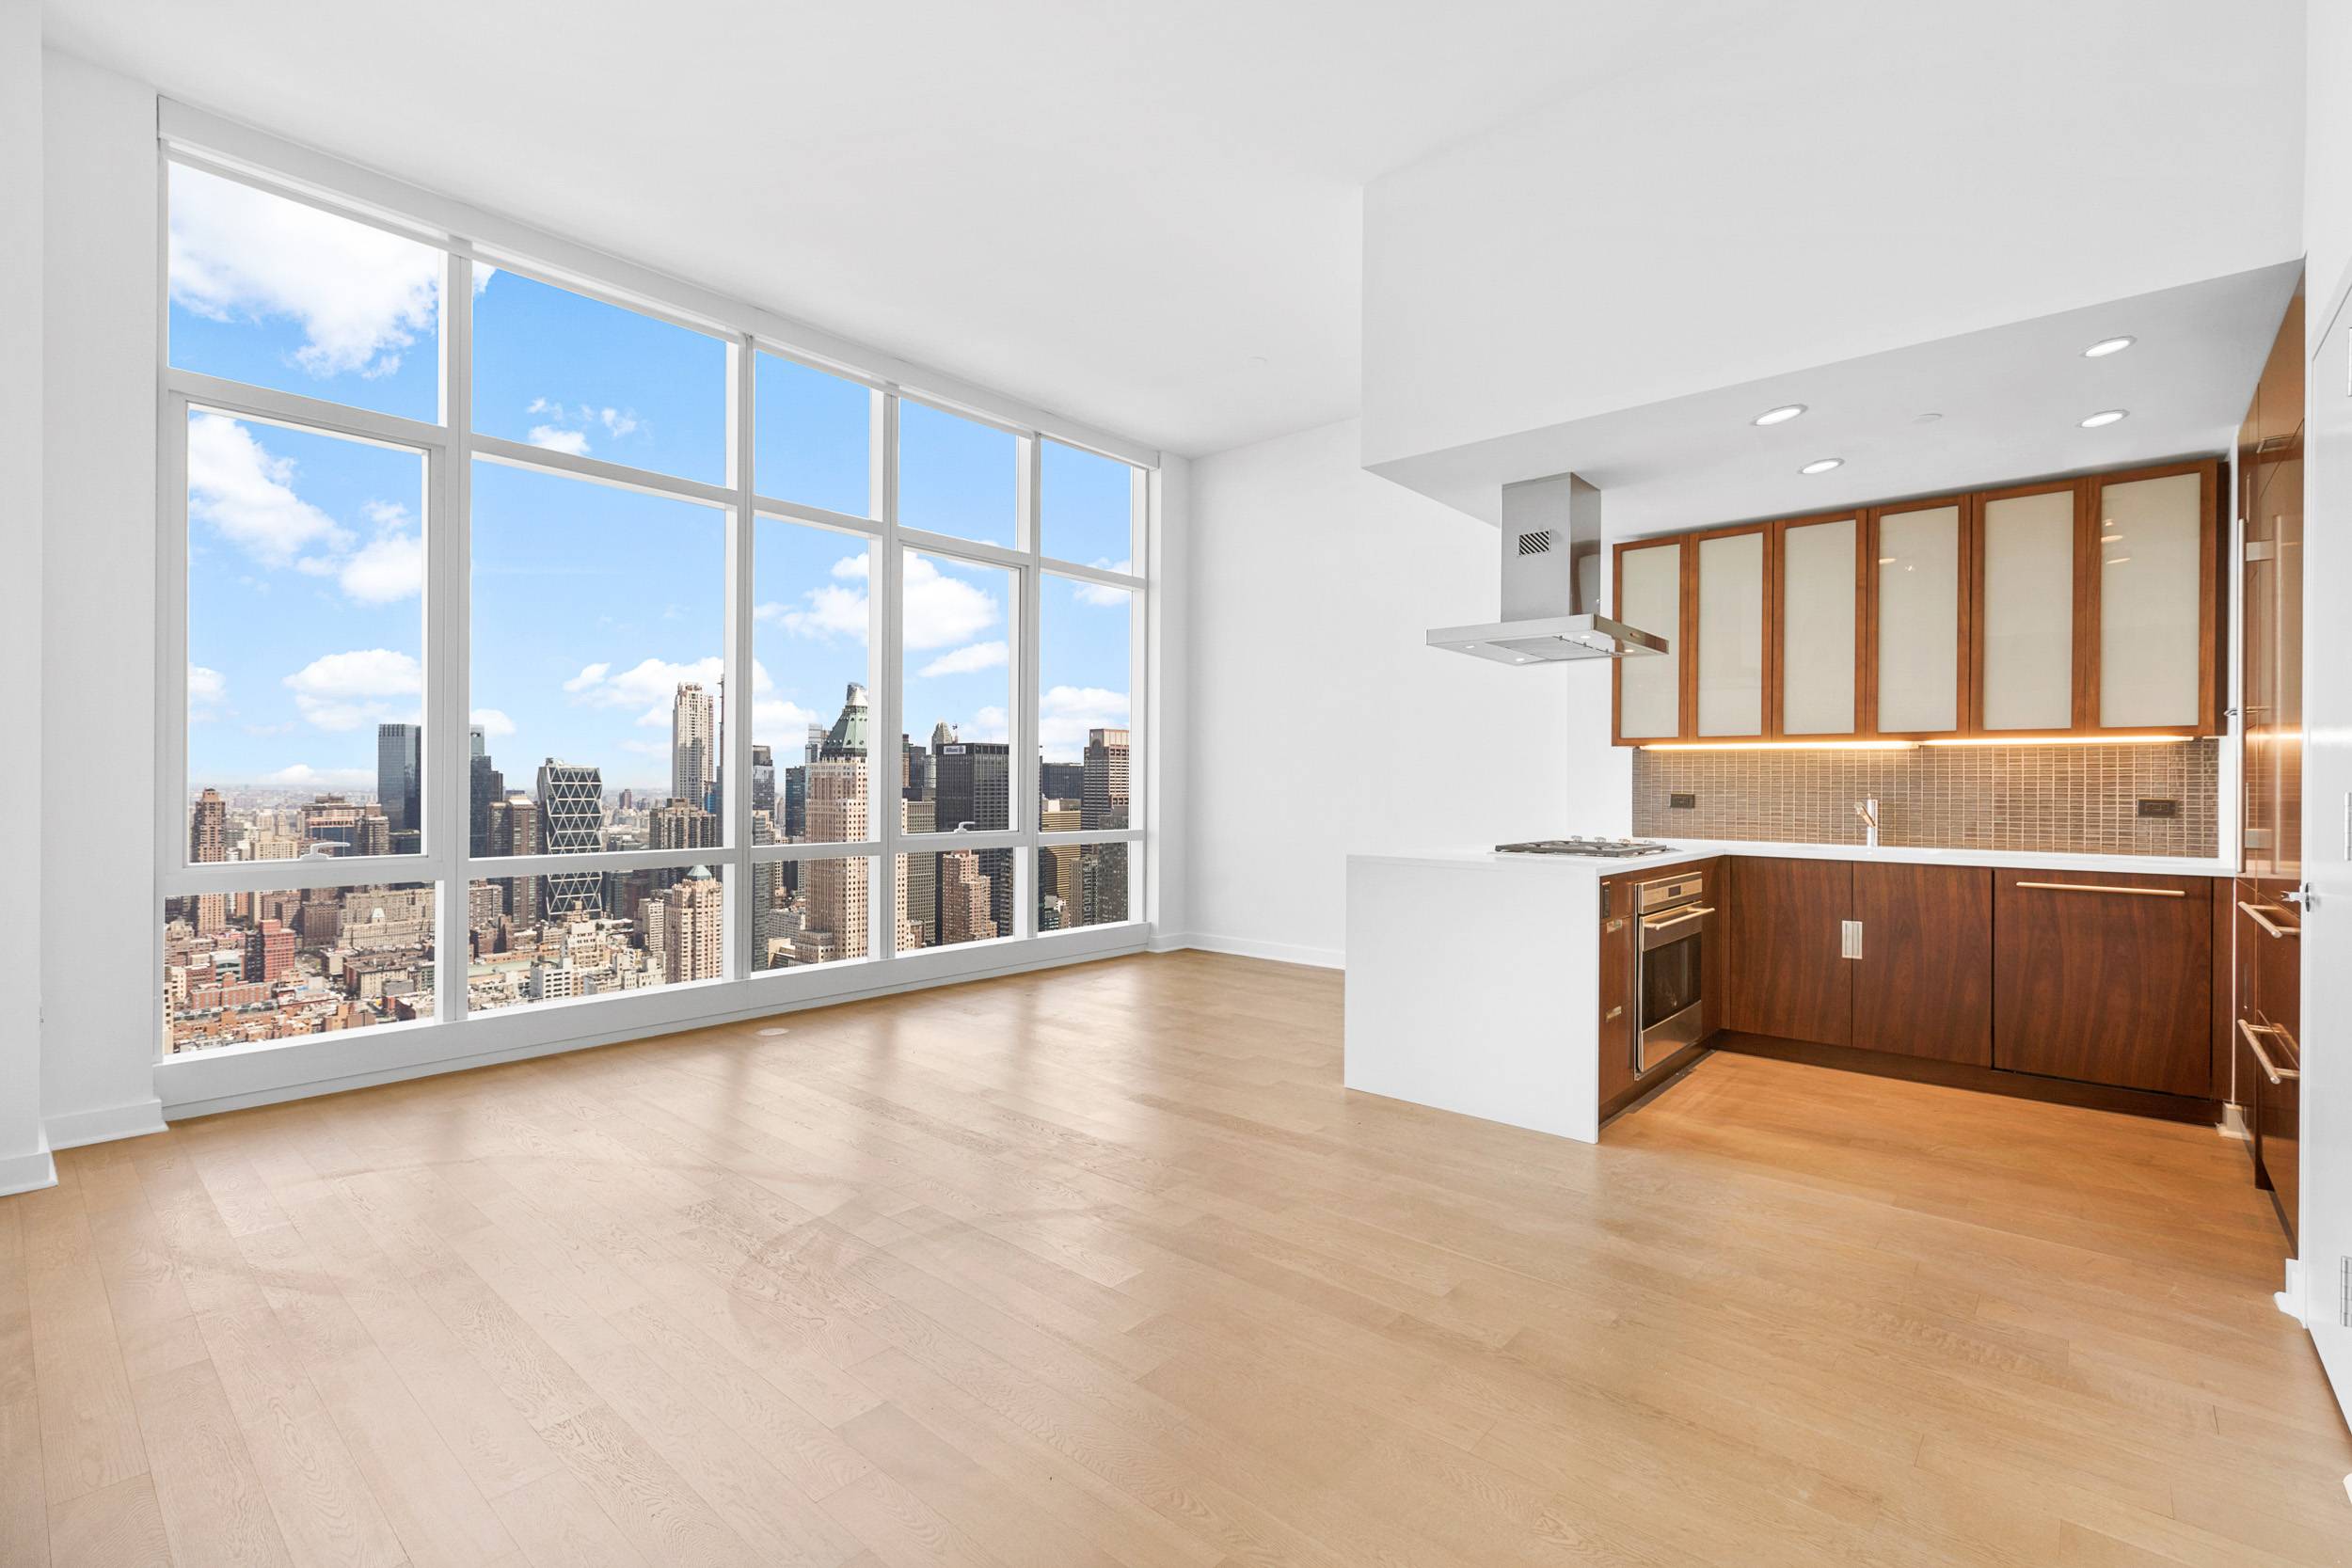 Rare   12 ft High  ceilings two bedroom and two bathroom with  STUNNING River view on 63 Floor  in Midtown West .